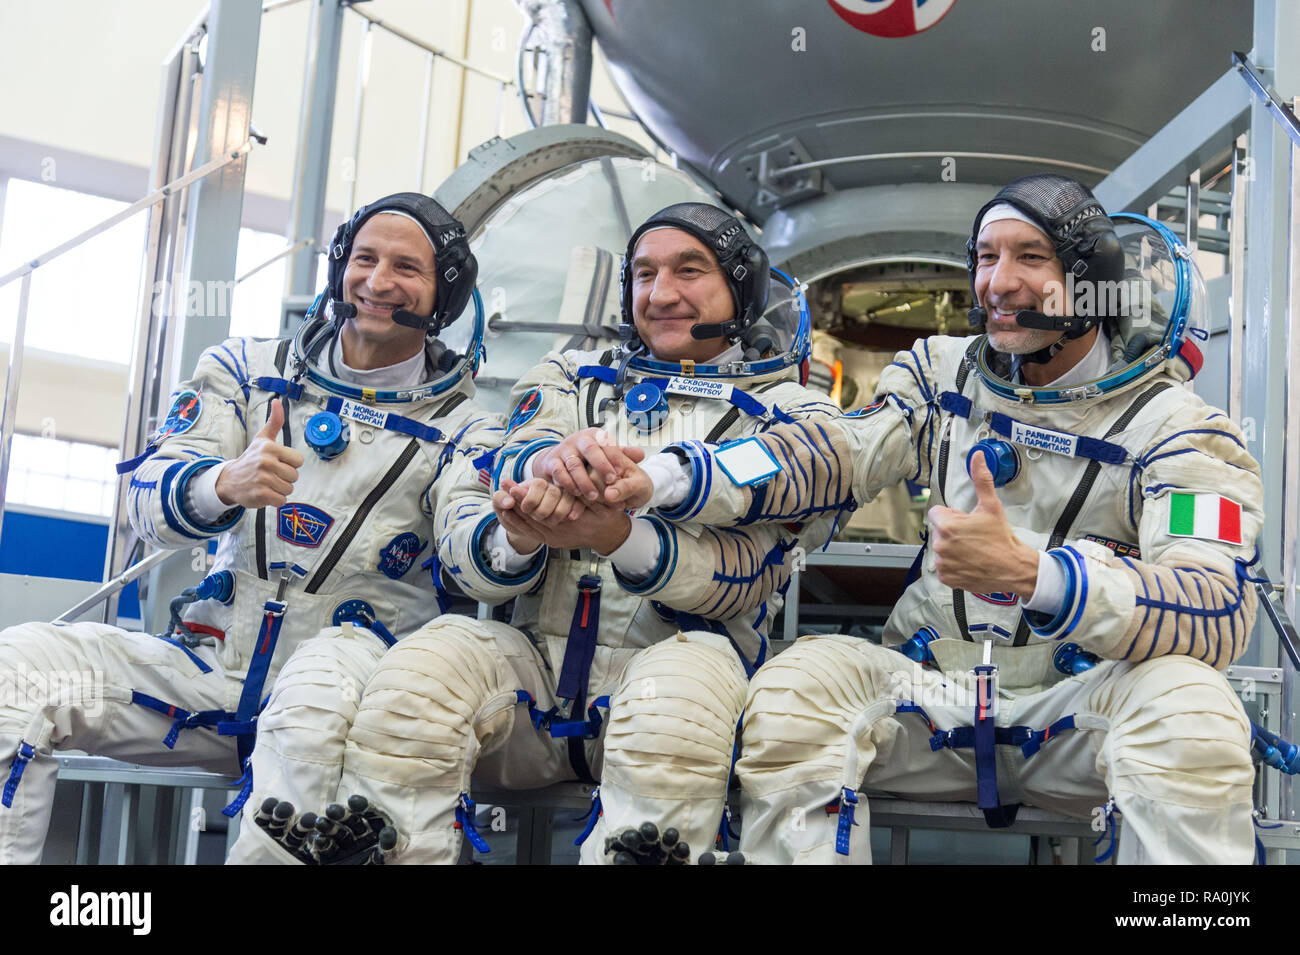 International Space Station Expedition 58 backup crew members Drew Morgan of NASA, left, Alexander Skvortsov of Roscosmos, center, and Luca Parmitano of the European Space Agency pose outside the Soyuz simulator at the Gagarin Cosmonaut Training Center November 13, 2018 in Star City, Russia. Stock Photo